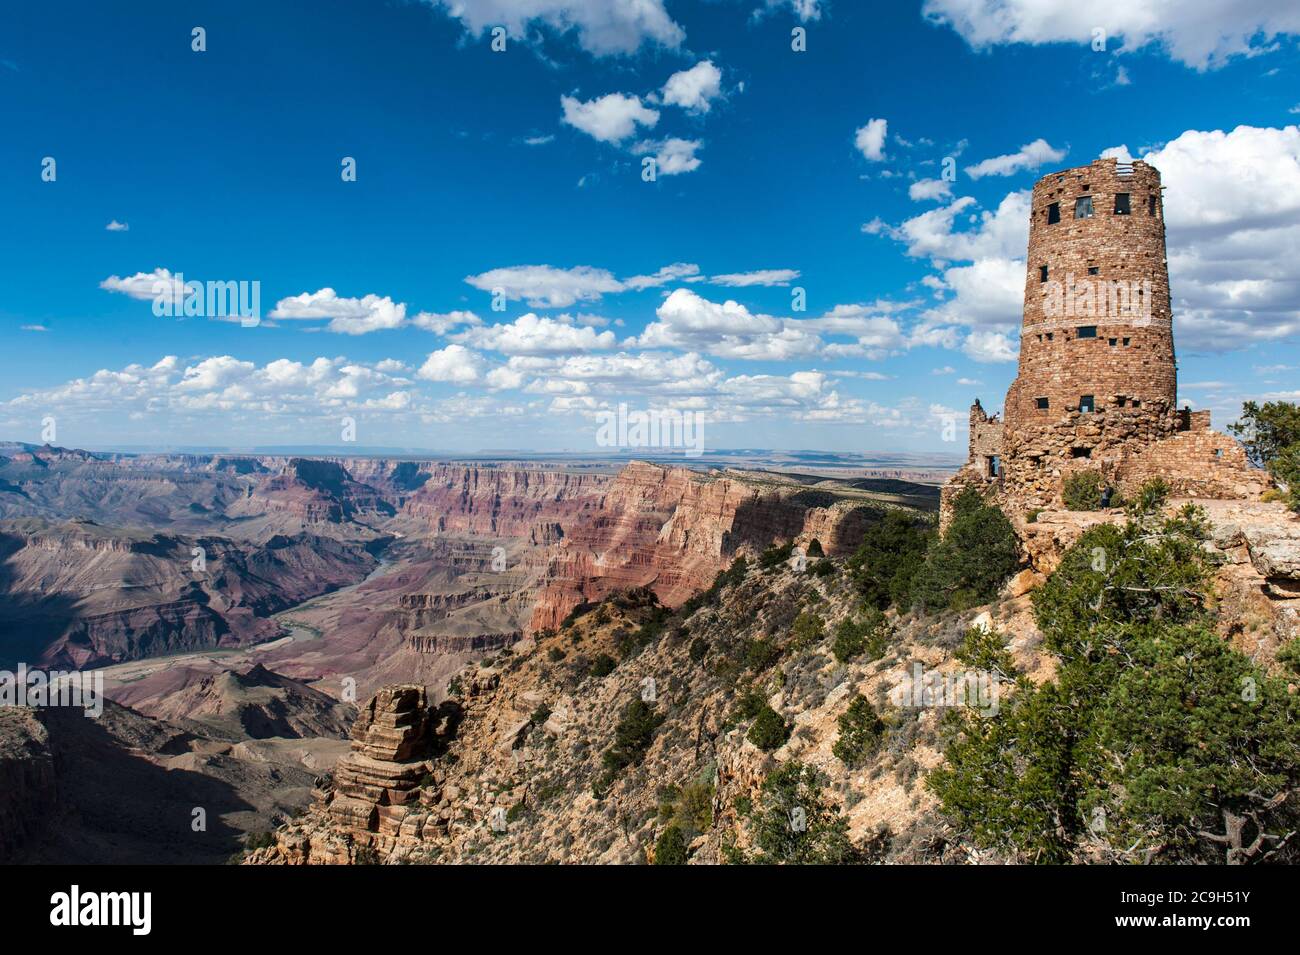 Observation tower, Desert View Watchtower, Colorado Plateau, Grand Canyon National Park, Arizona, USA Stock Photo